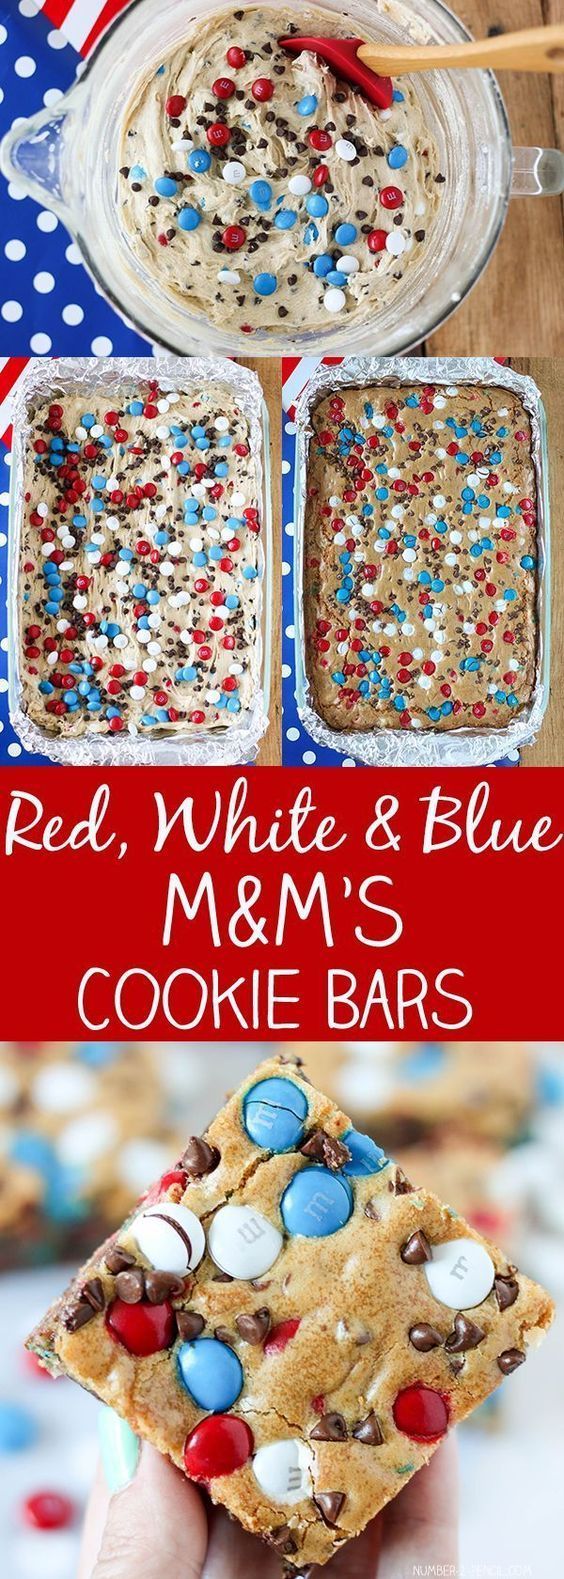 Red, White and Blue M&M'S Cookie Bars Recipe -   16 fourth of july desserts For A Crowd ideas